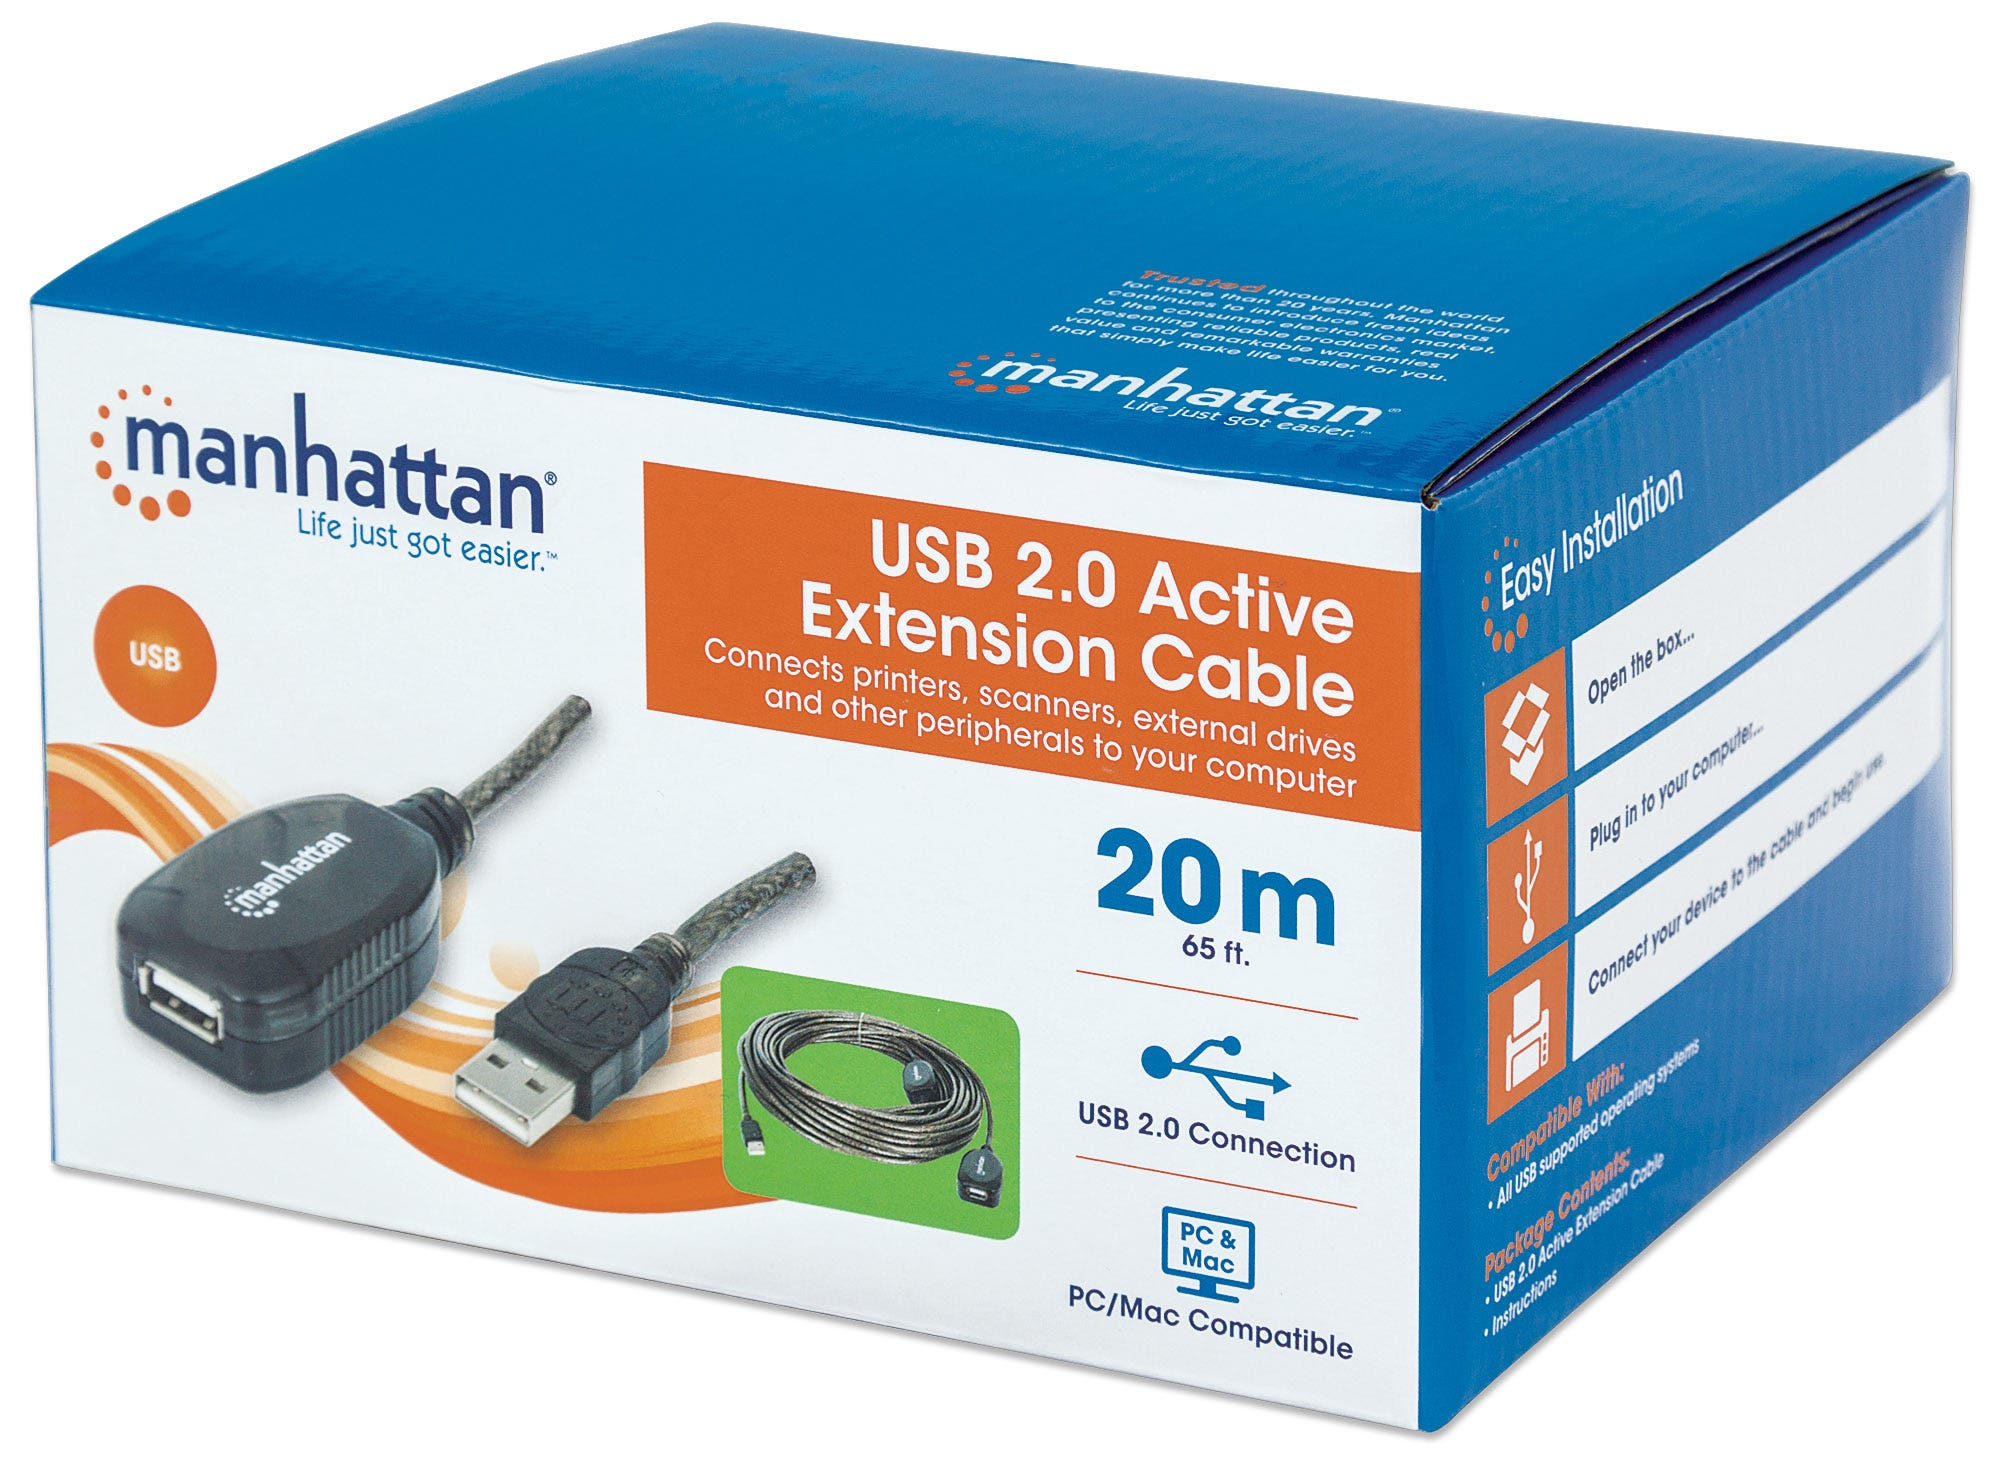 Manhattan USB-A to USB-A Extension Cable, 20m, Male to Female, Active, 480 Mbps (USB 2.0), Daisy-Chainable, Built In Repeater, Black, Boxed